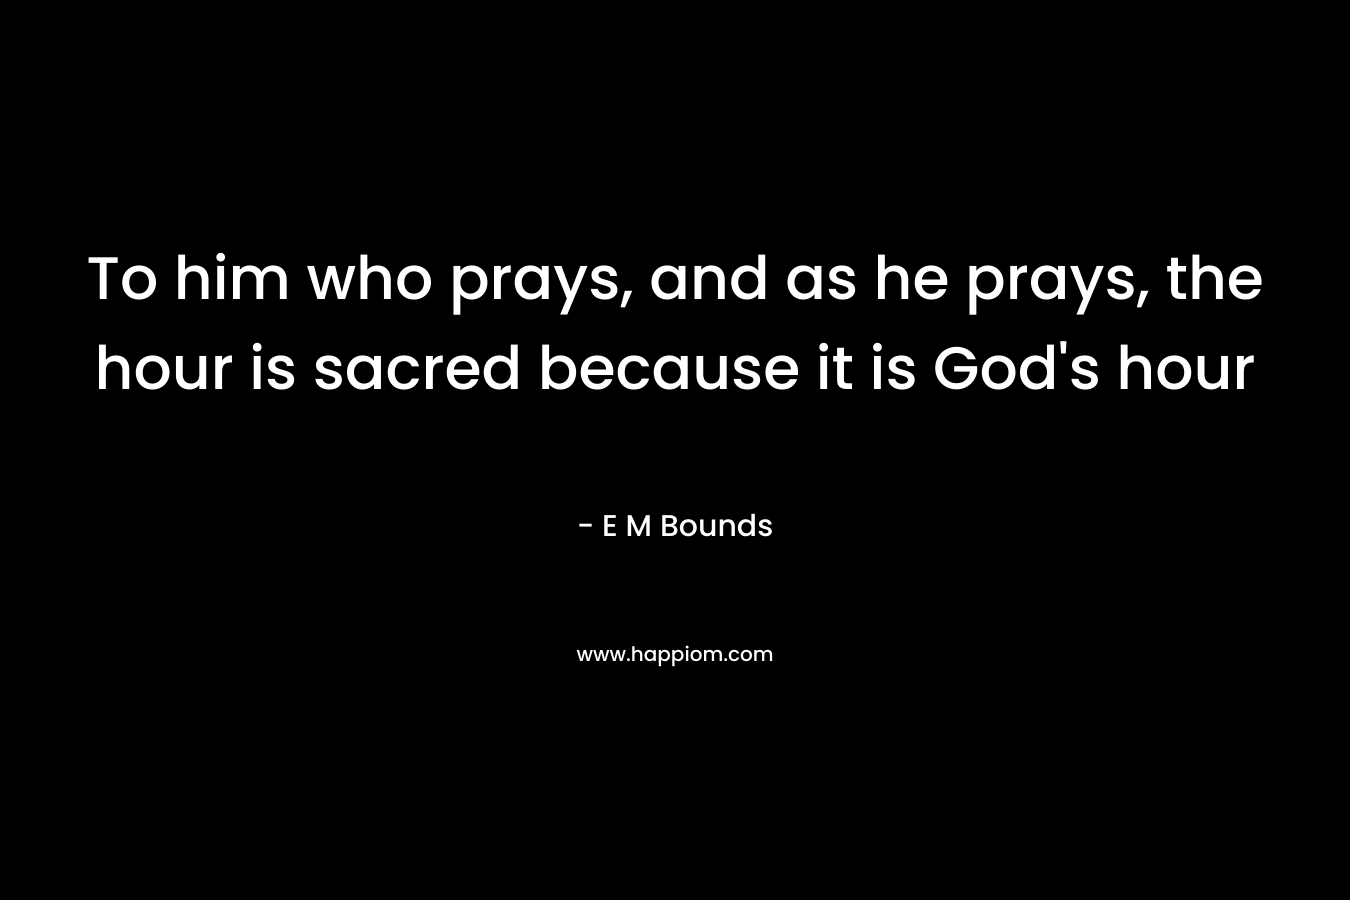 To him who prays, and as he prays, the hour is sacred because it is God's hour